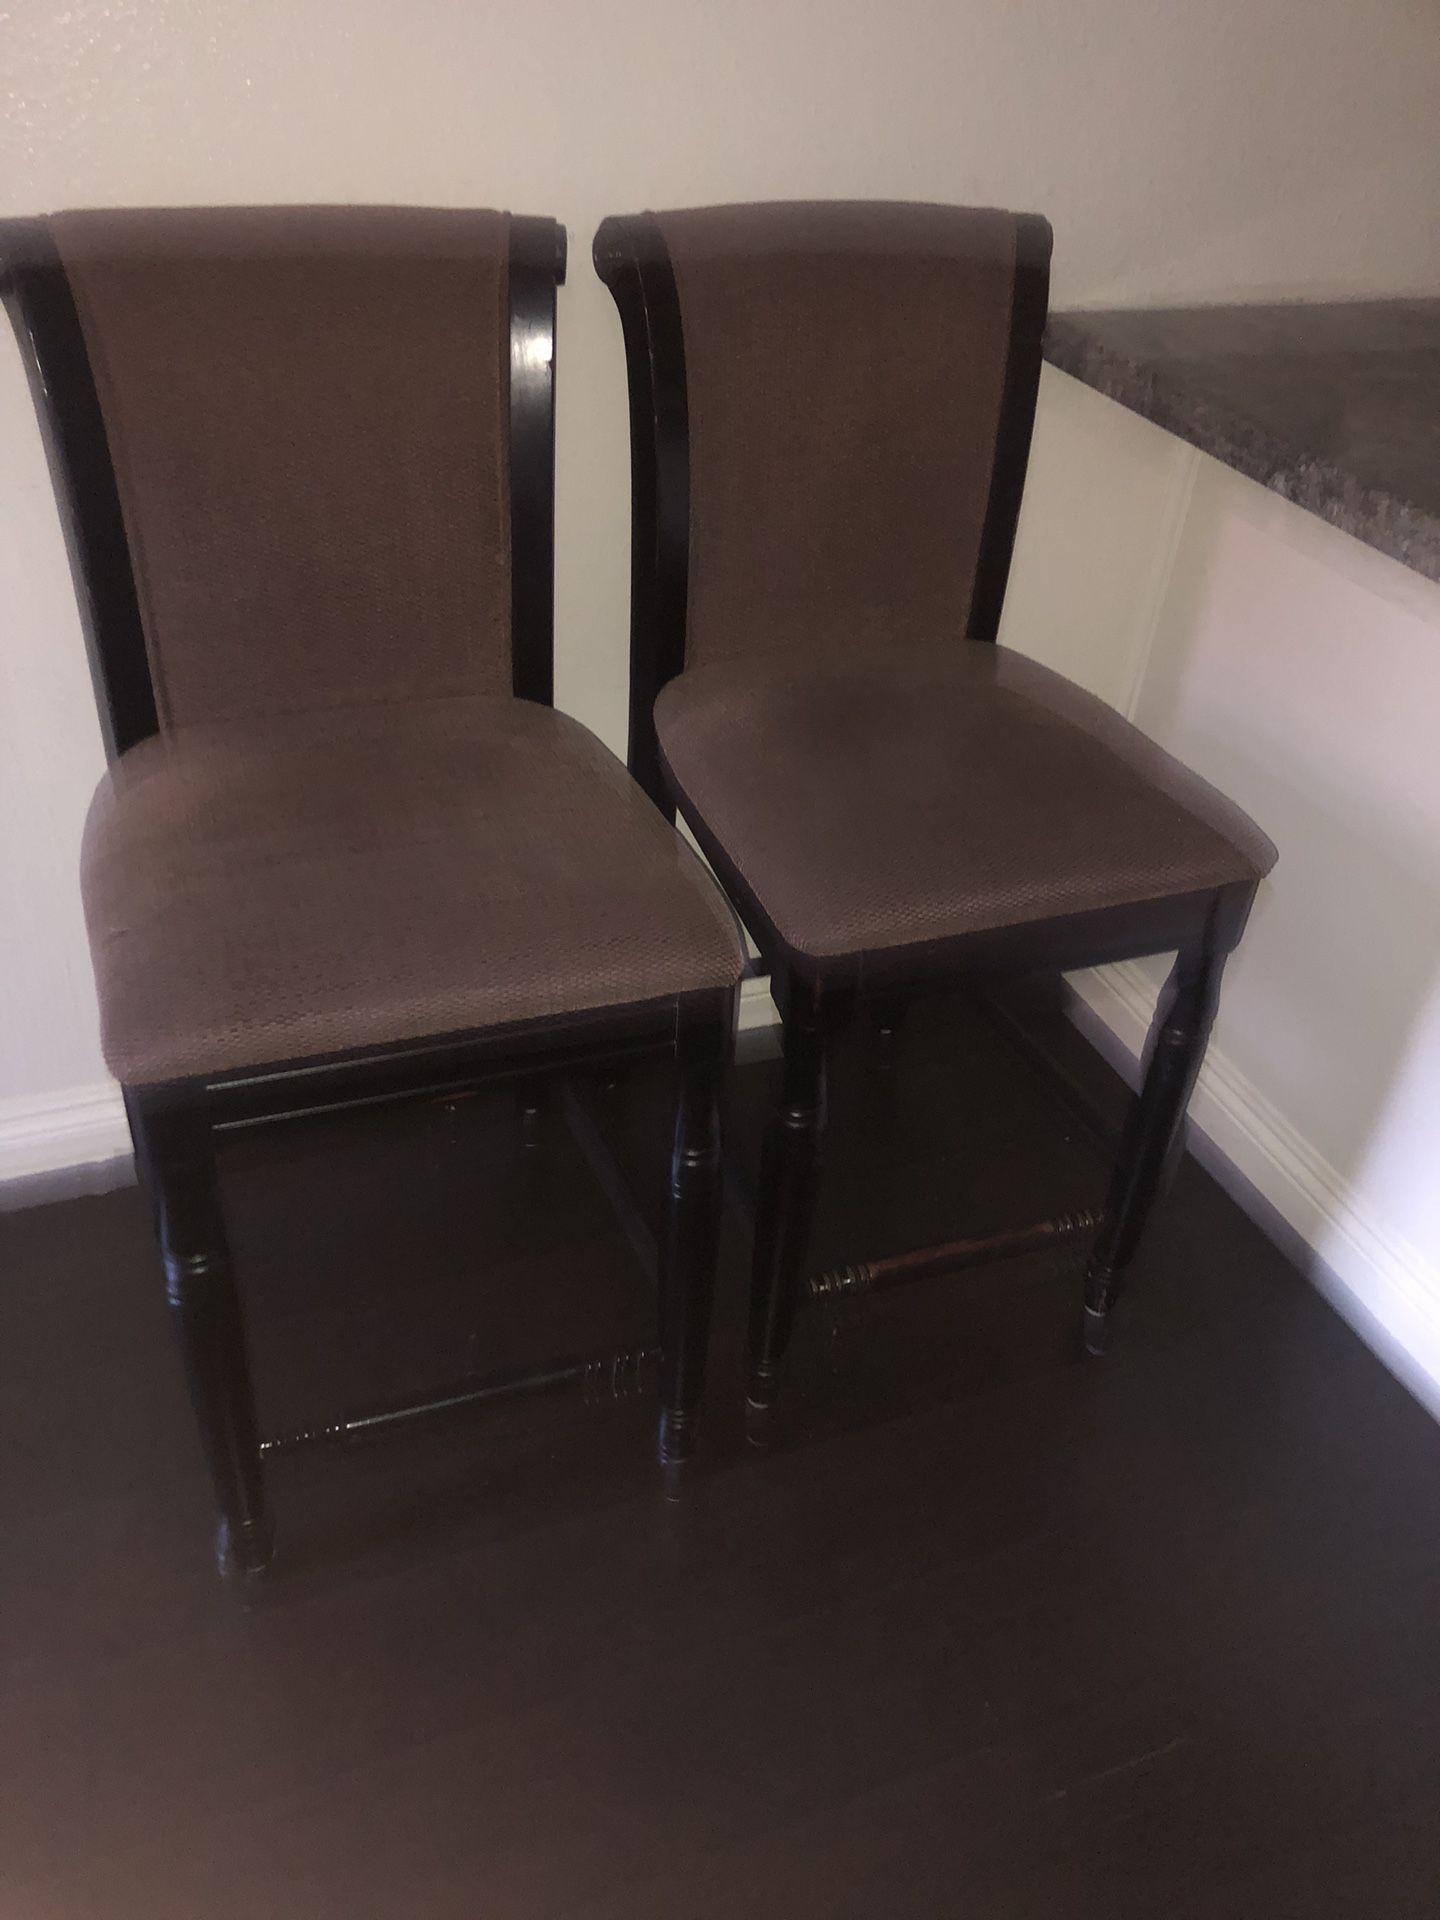 Chairs $40